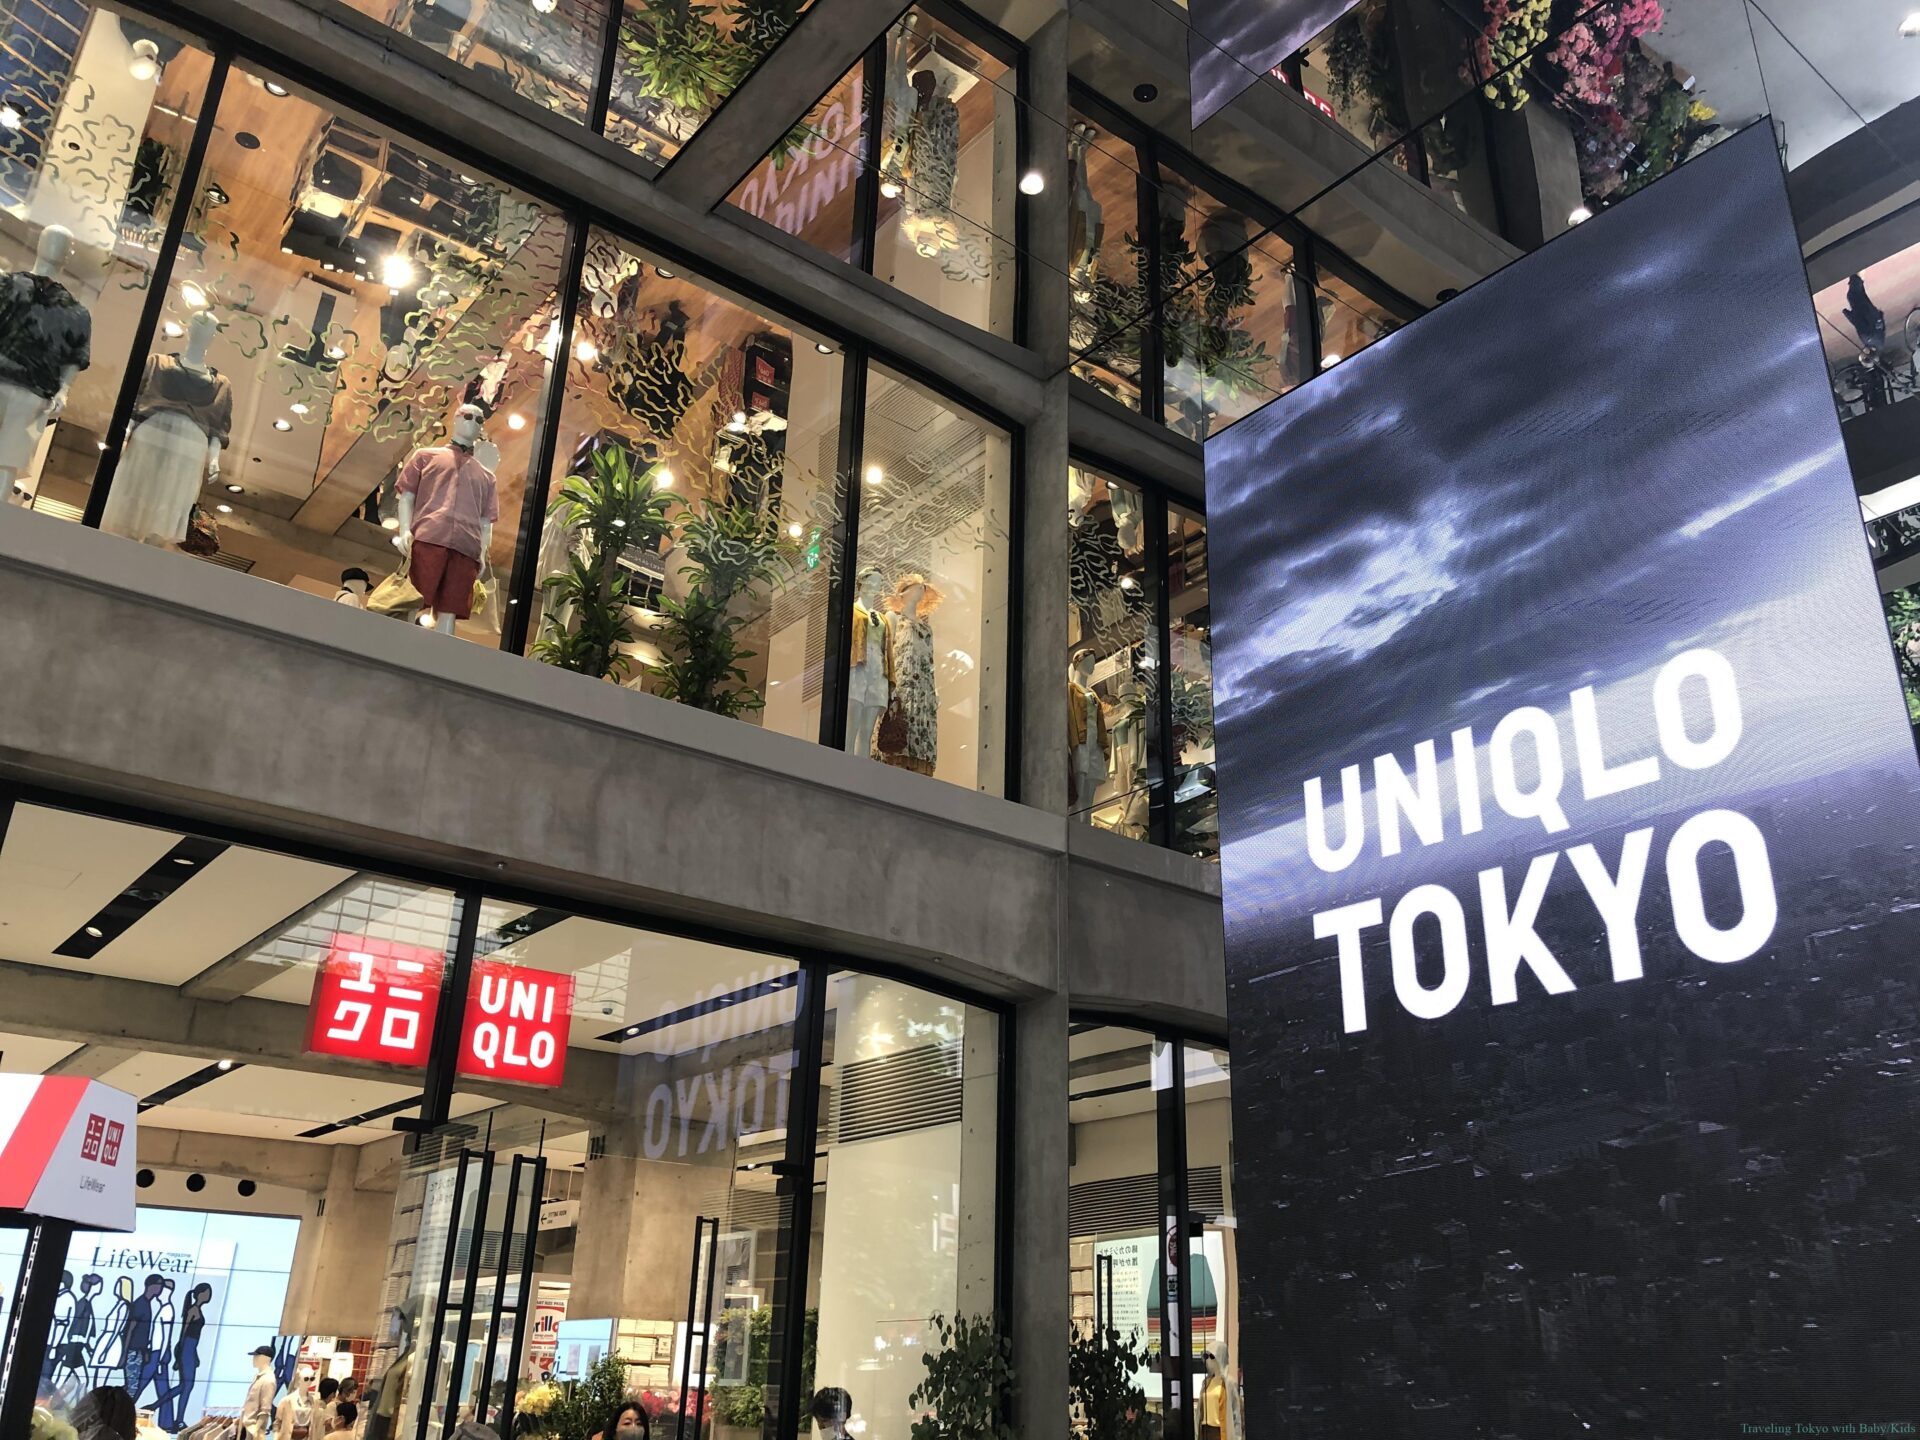 Uniqlo Tokyo The Newest And Biggest Flagship Store In Ginza Opened 6 19 Traveling Tokyo With Baby Kids